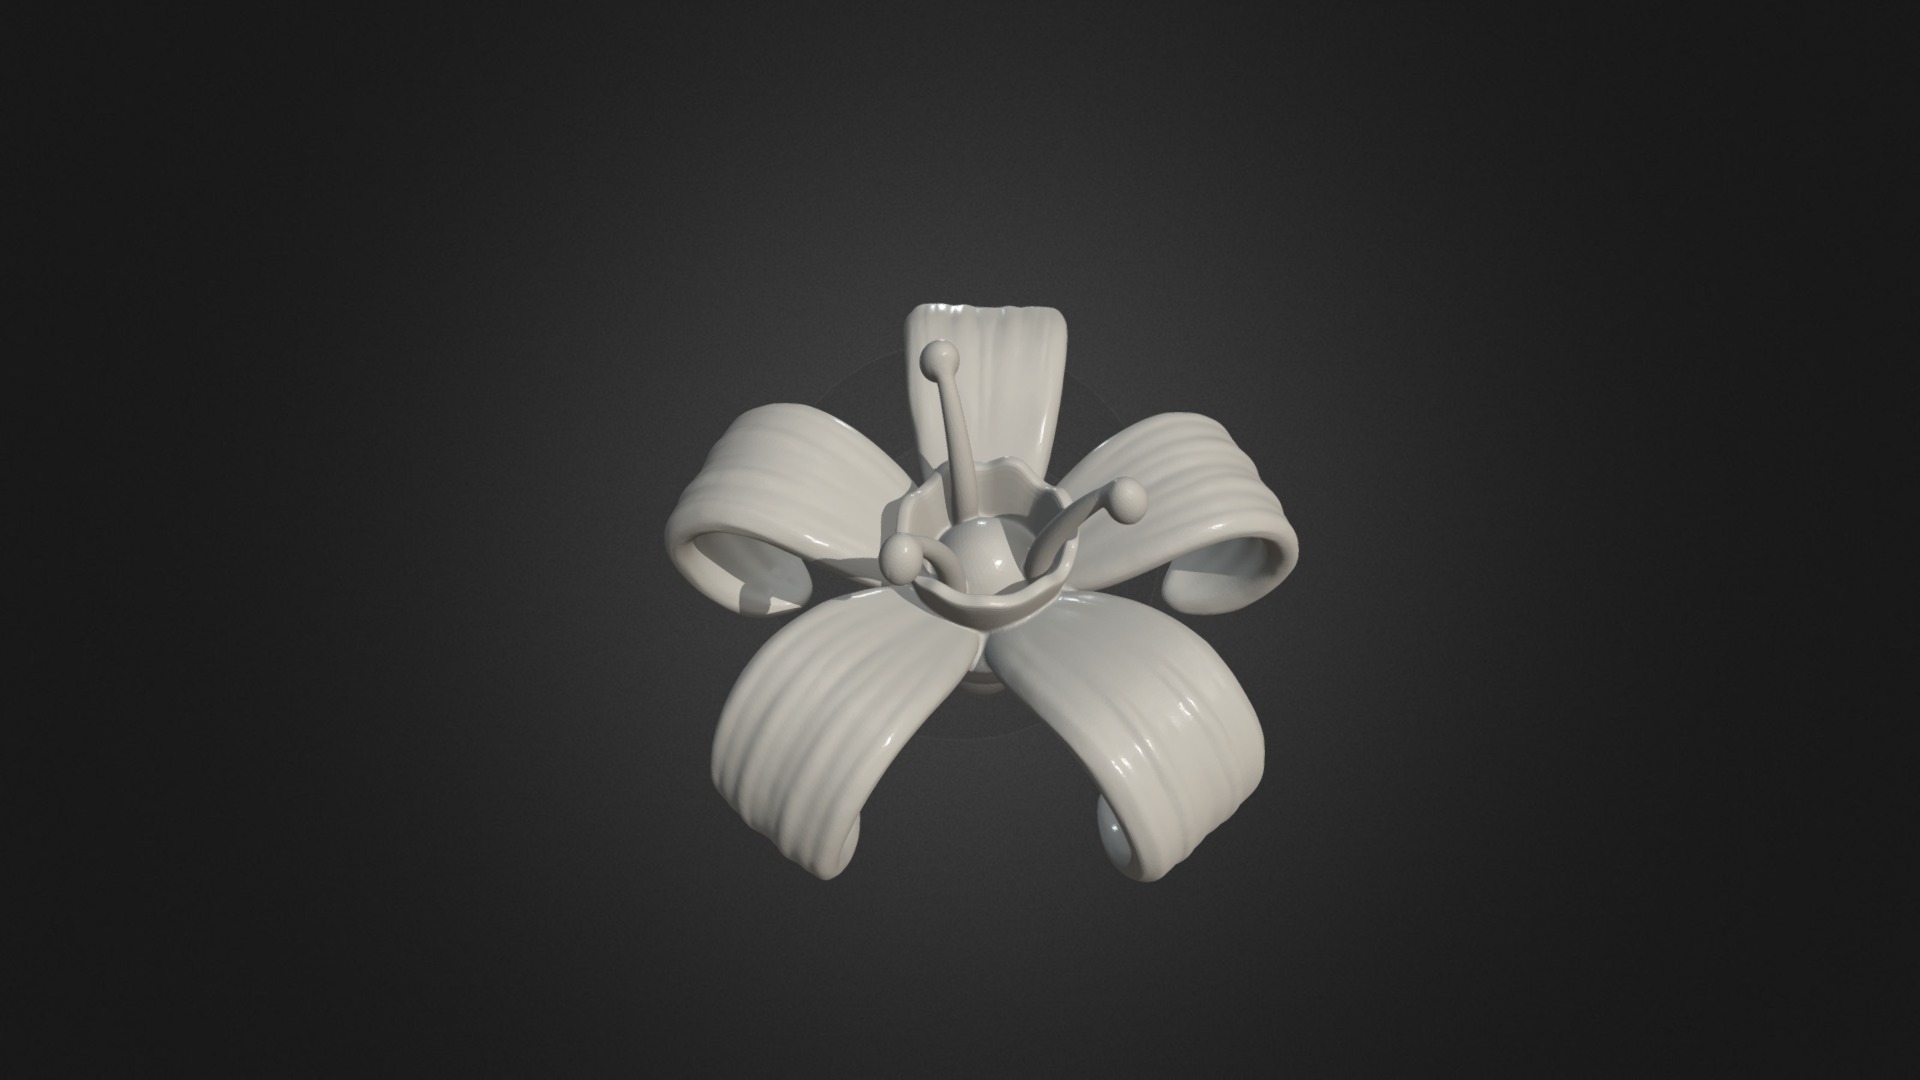 3D model Flower - This is a 3D model of the Flower. The 3D model is about a white flower with a black background.